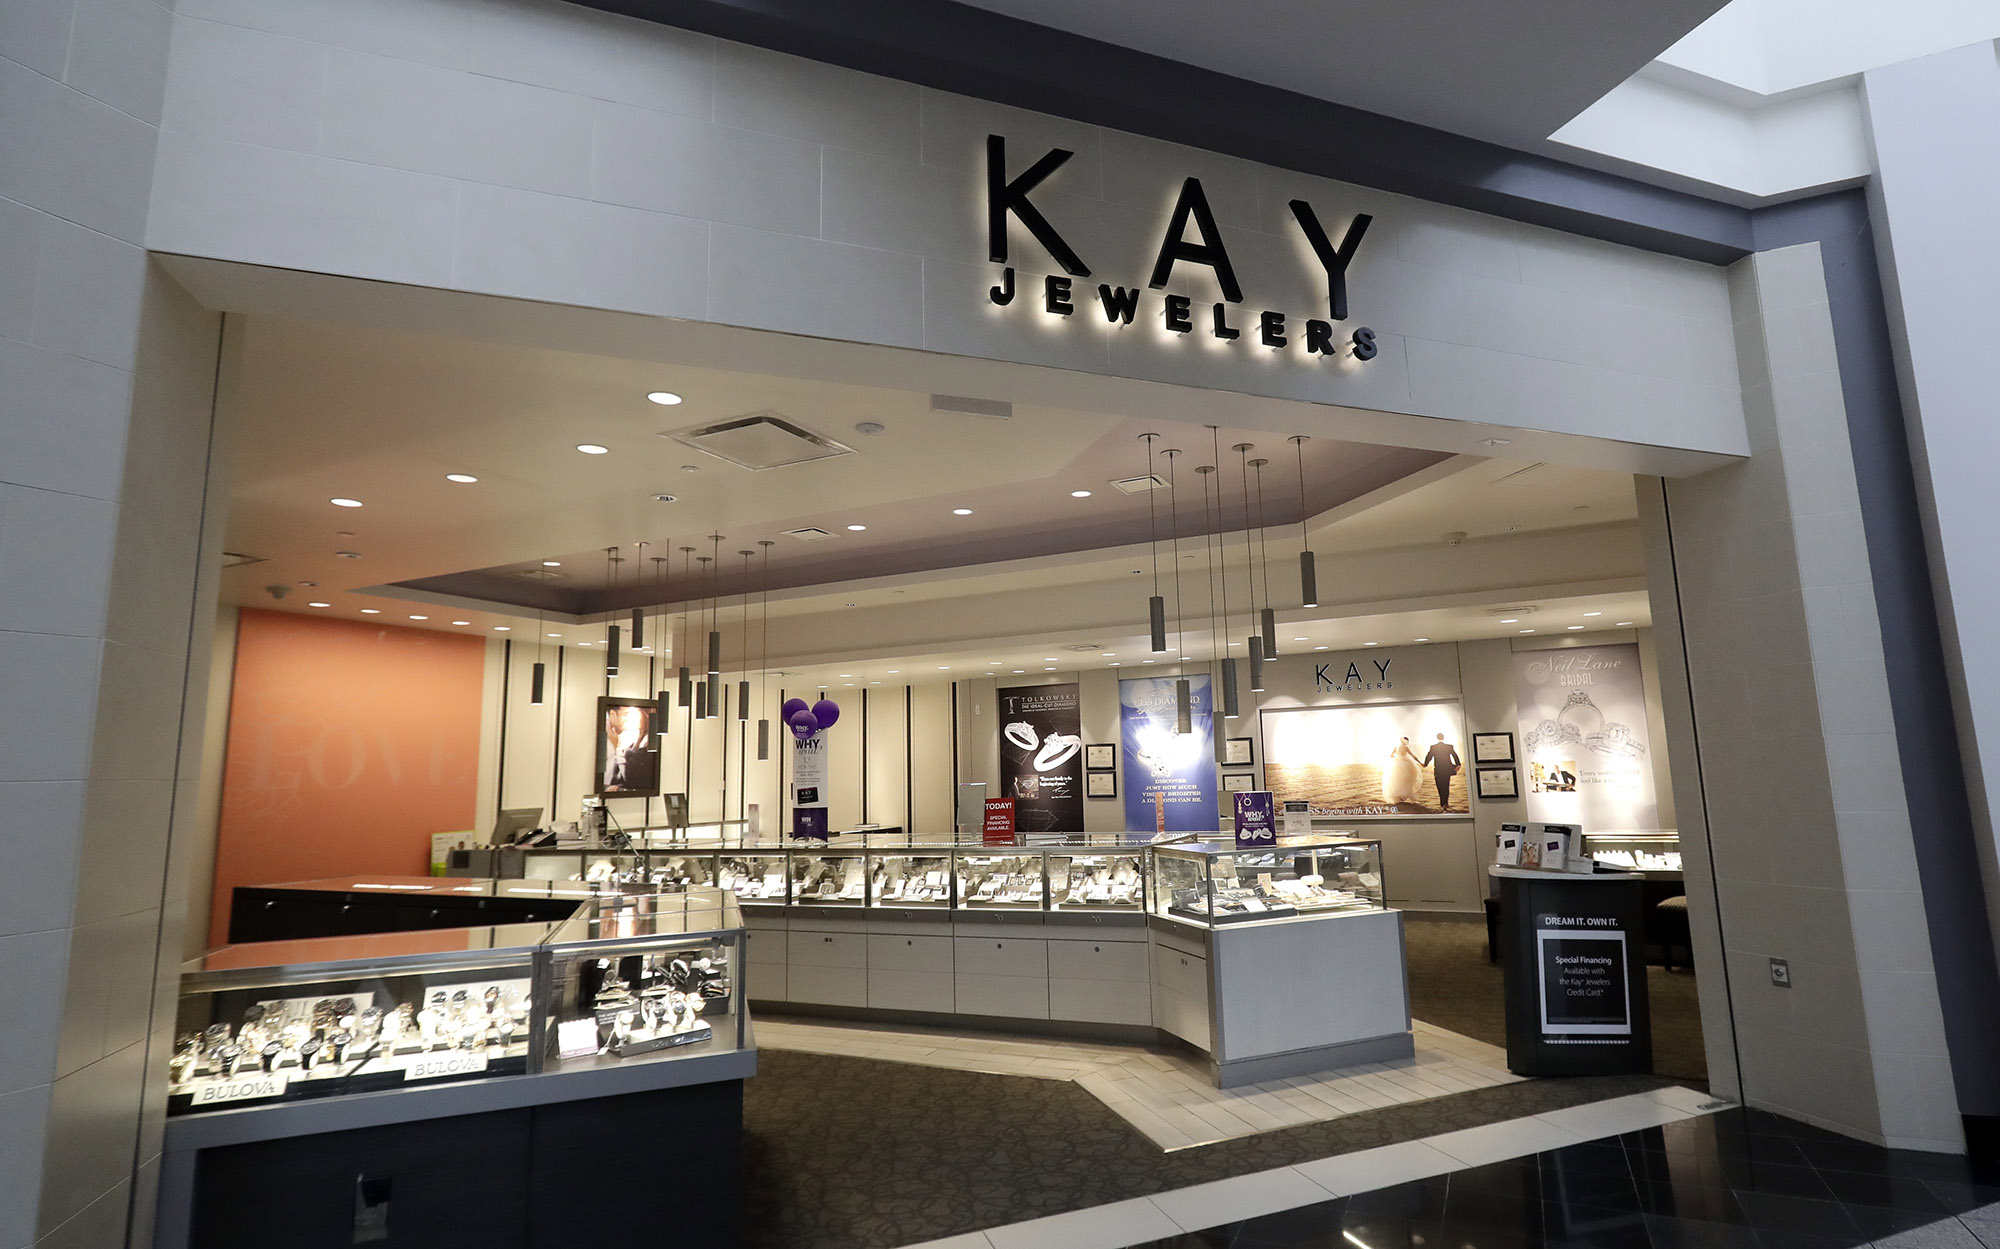 The KAY Jewelers Credit Card's advantages